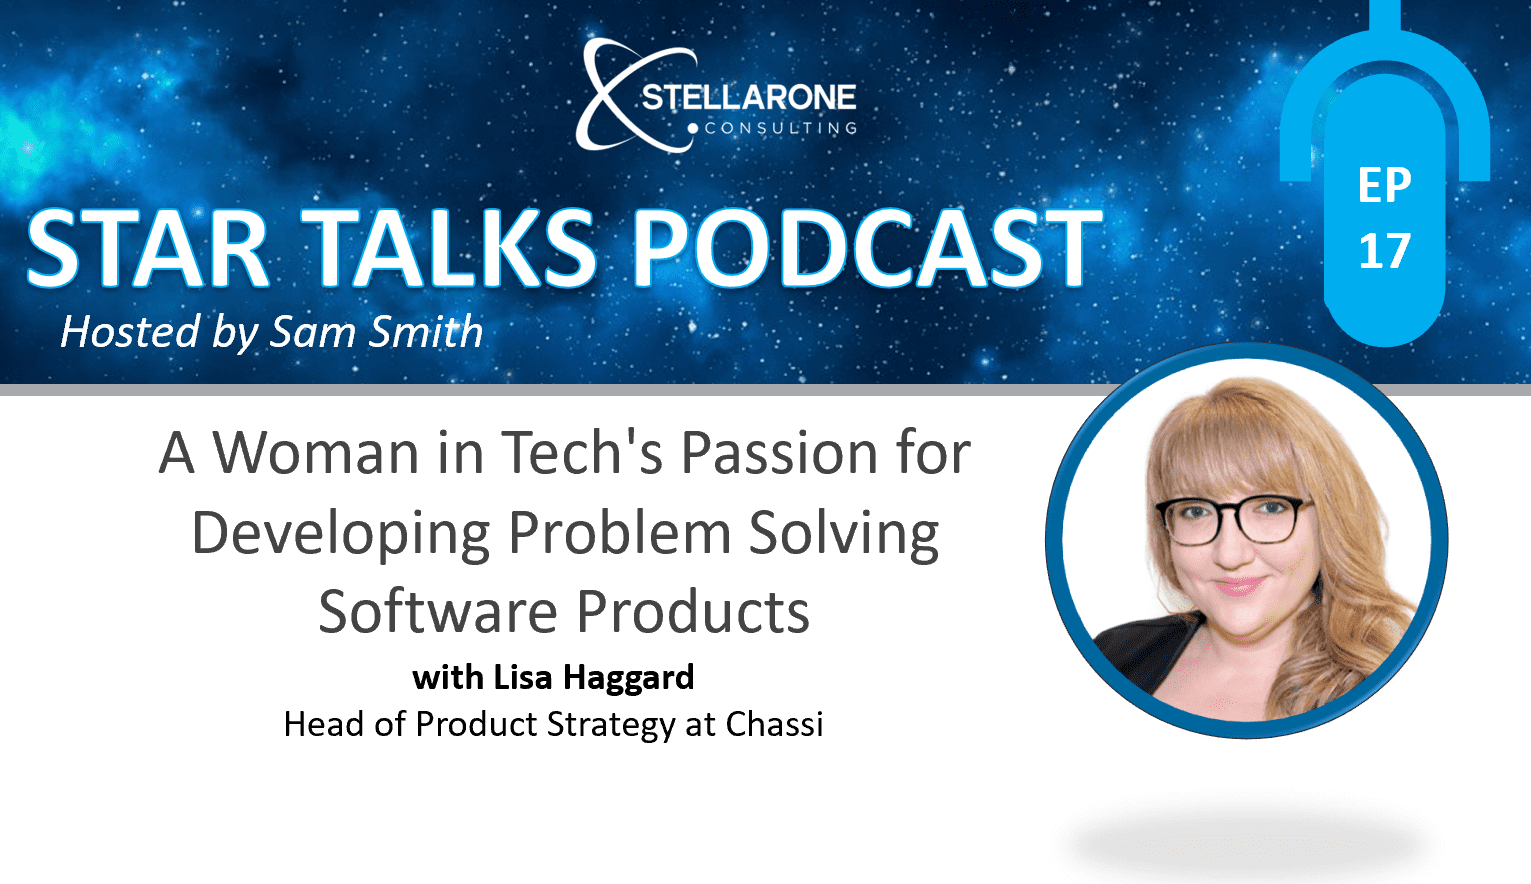 PODCAST: A Woman in Tech's Passion for Developing Problem Solving Software Products